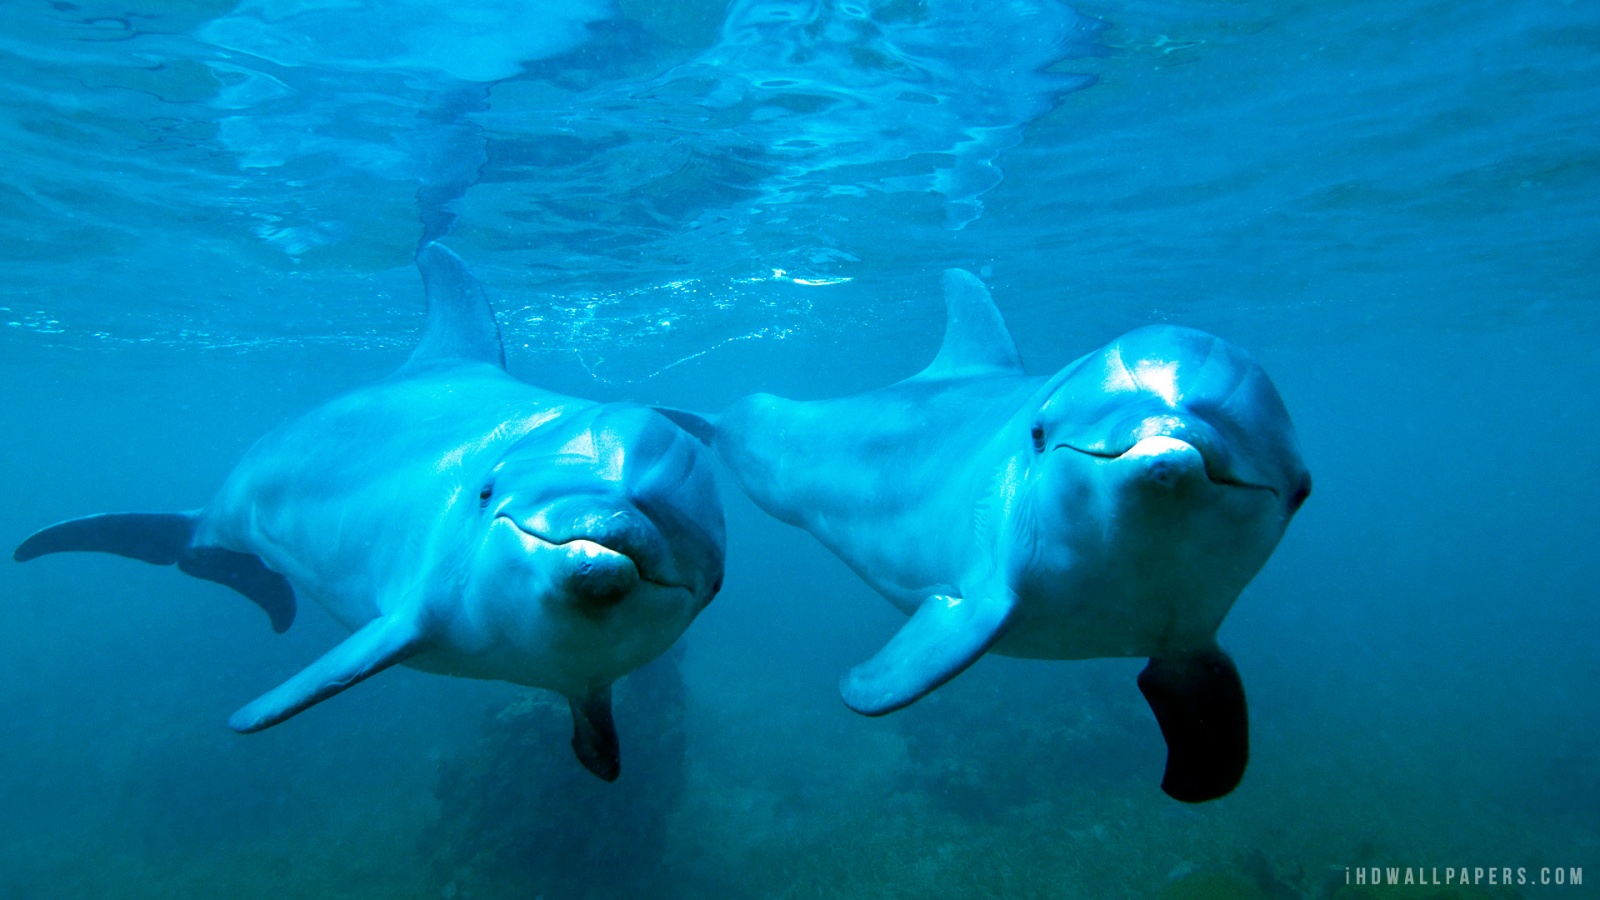 Dolphins Underwater HD Wallpaper   iHD Wallpapers